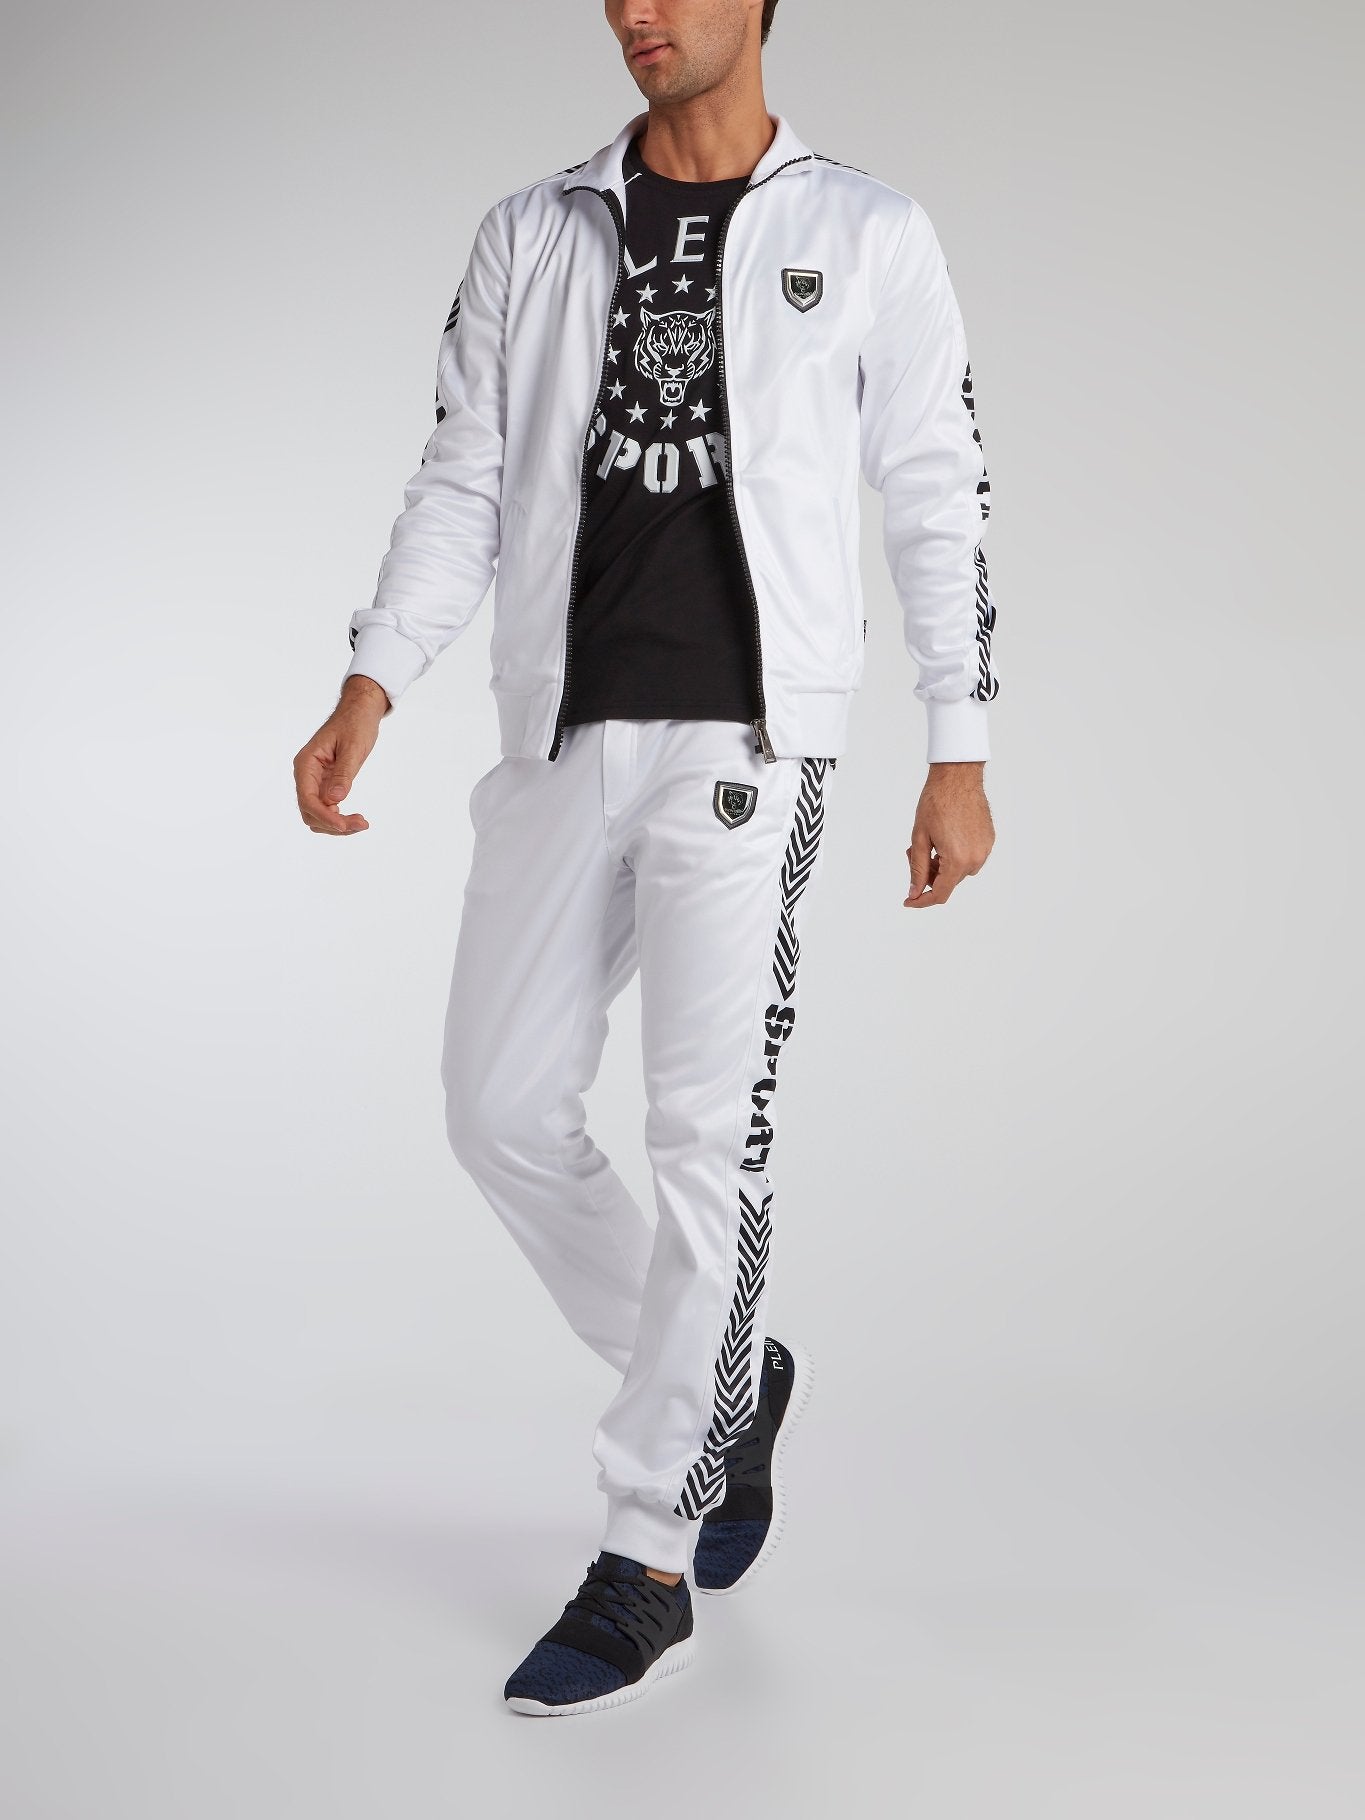 White Contrast High Neck Sweat Jacket